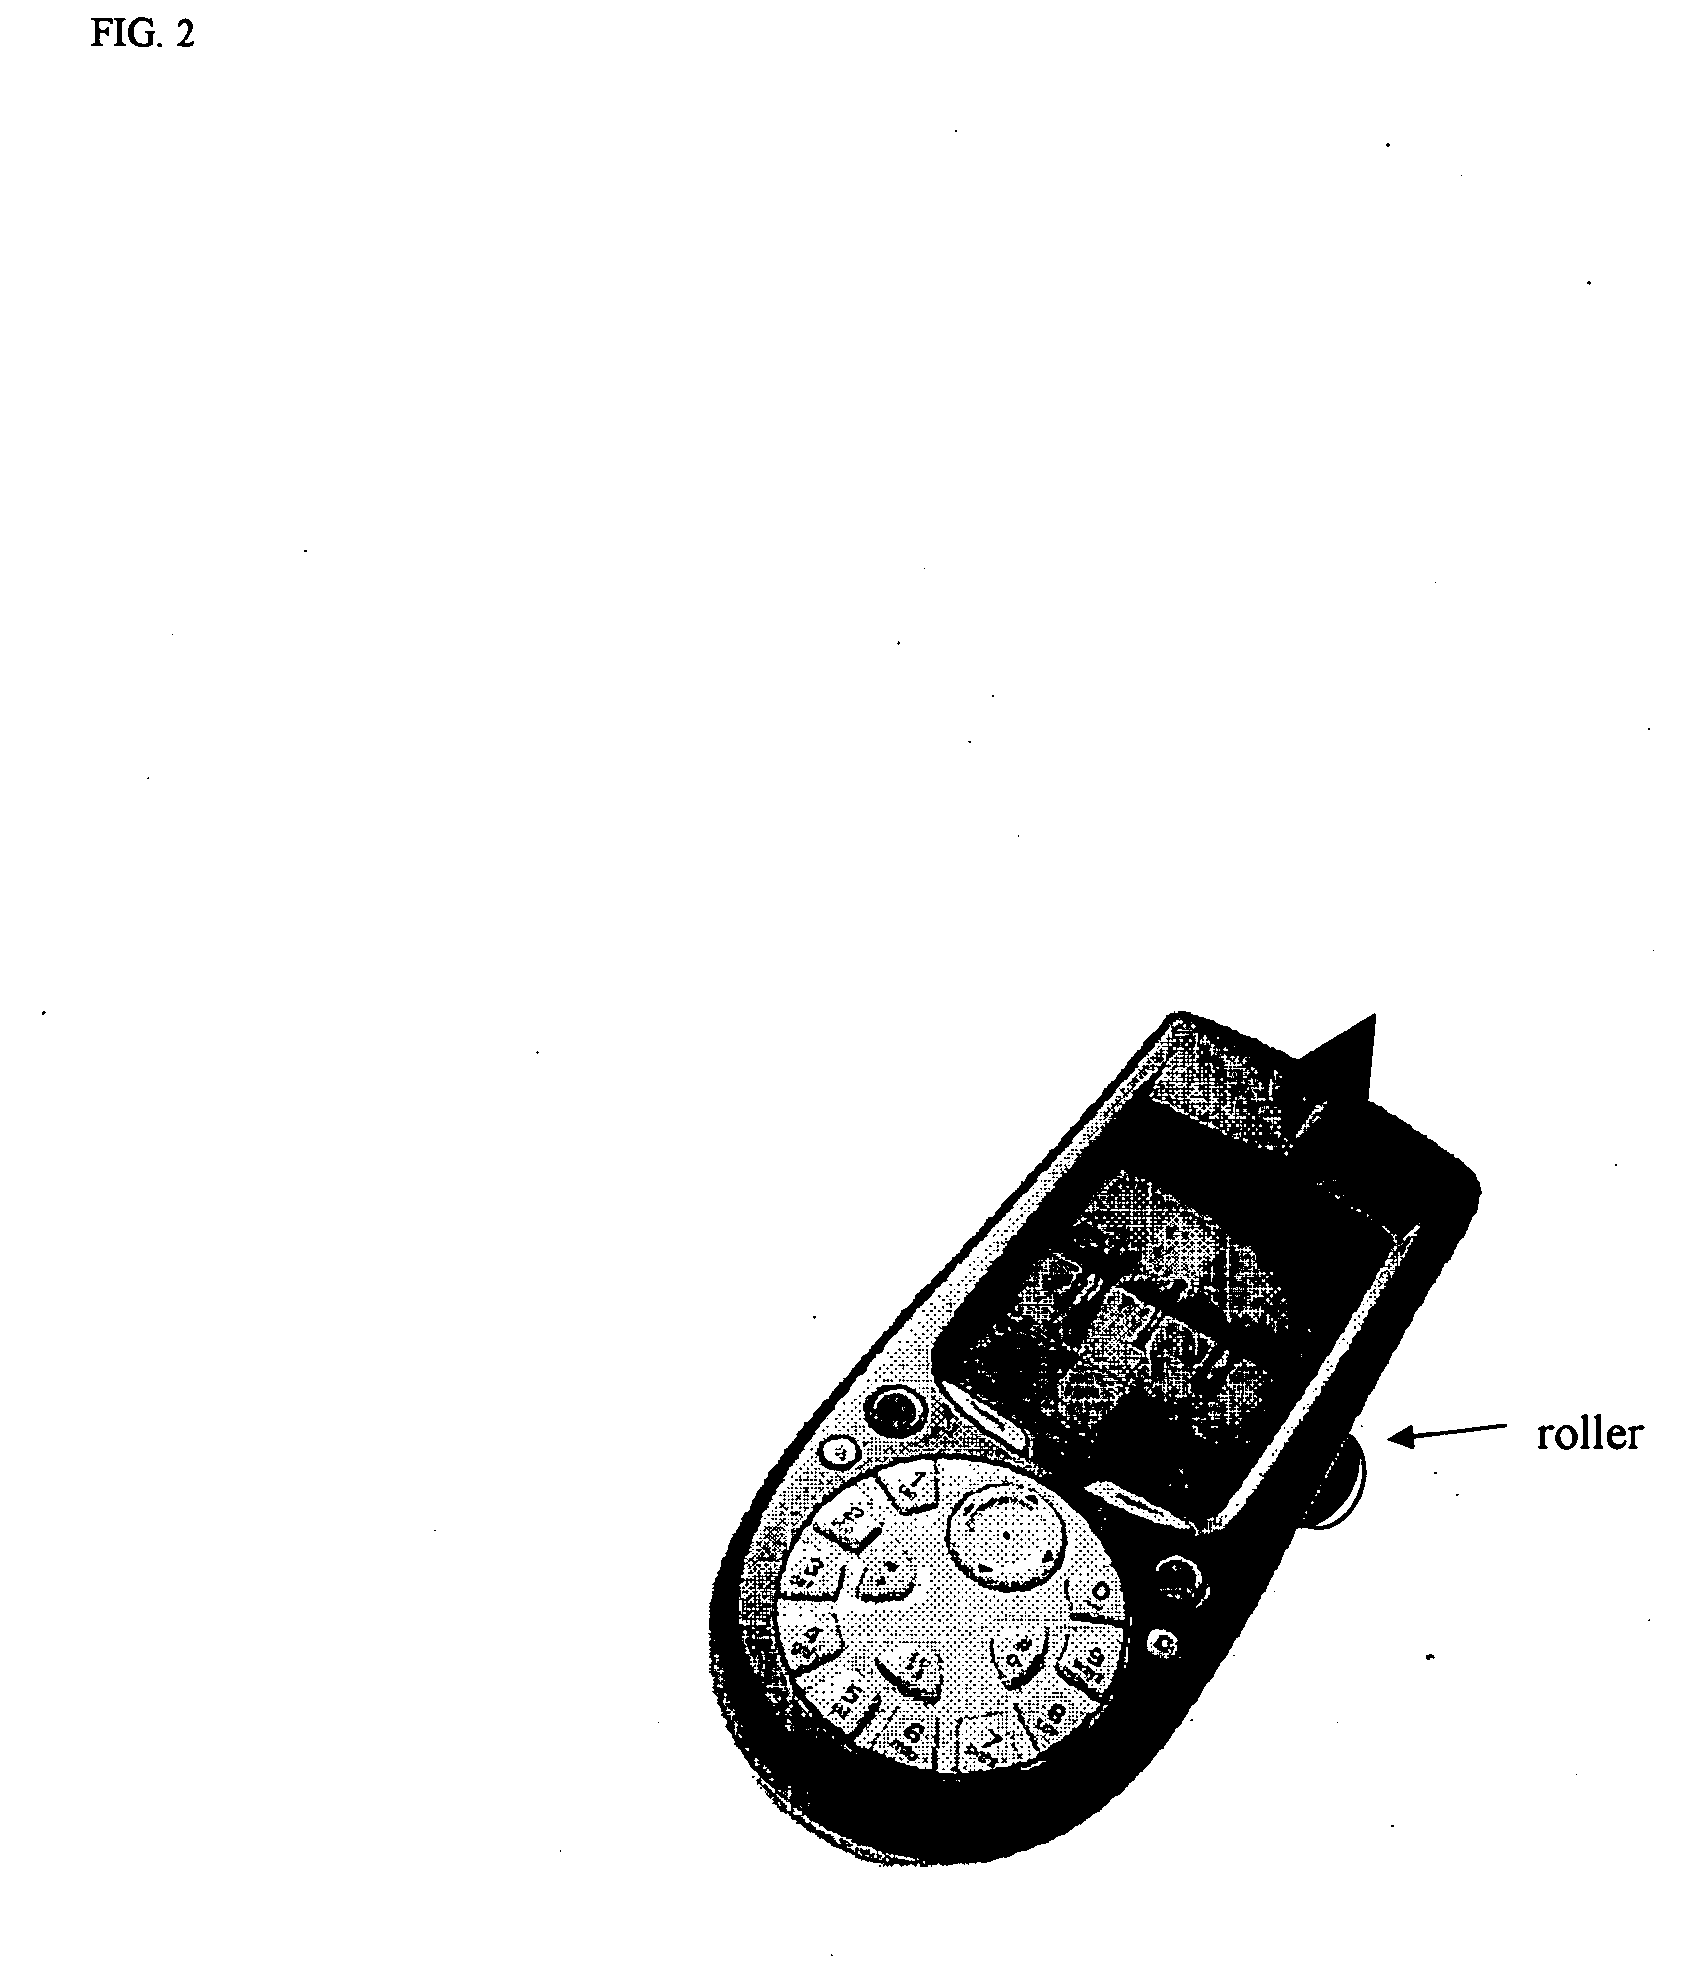 Pointing interface for person-to-person information exchange